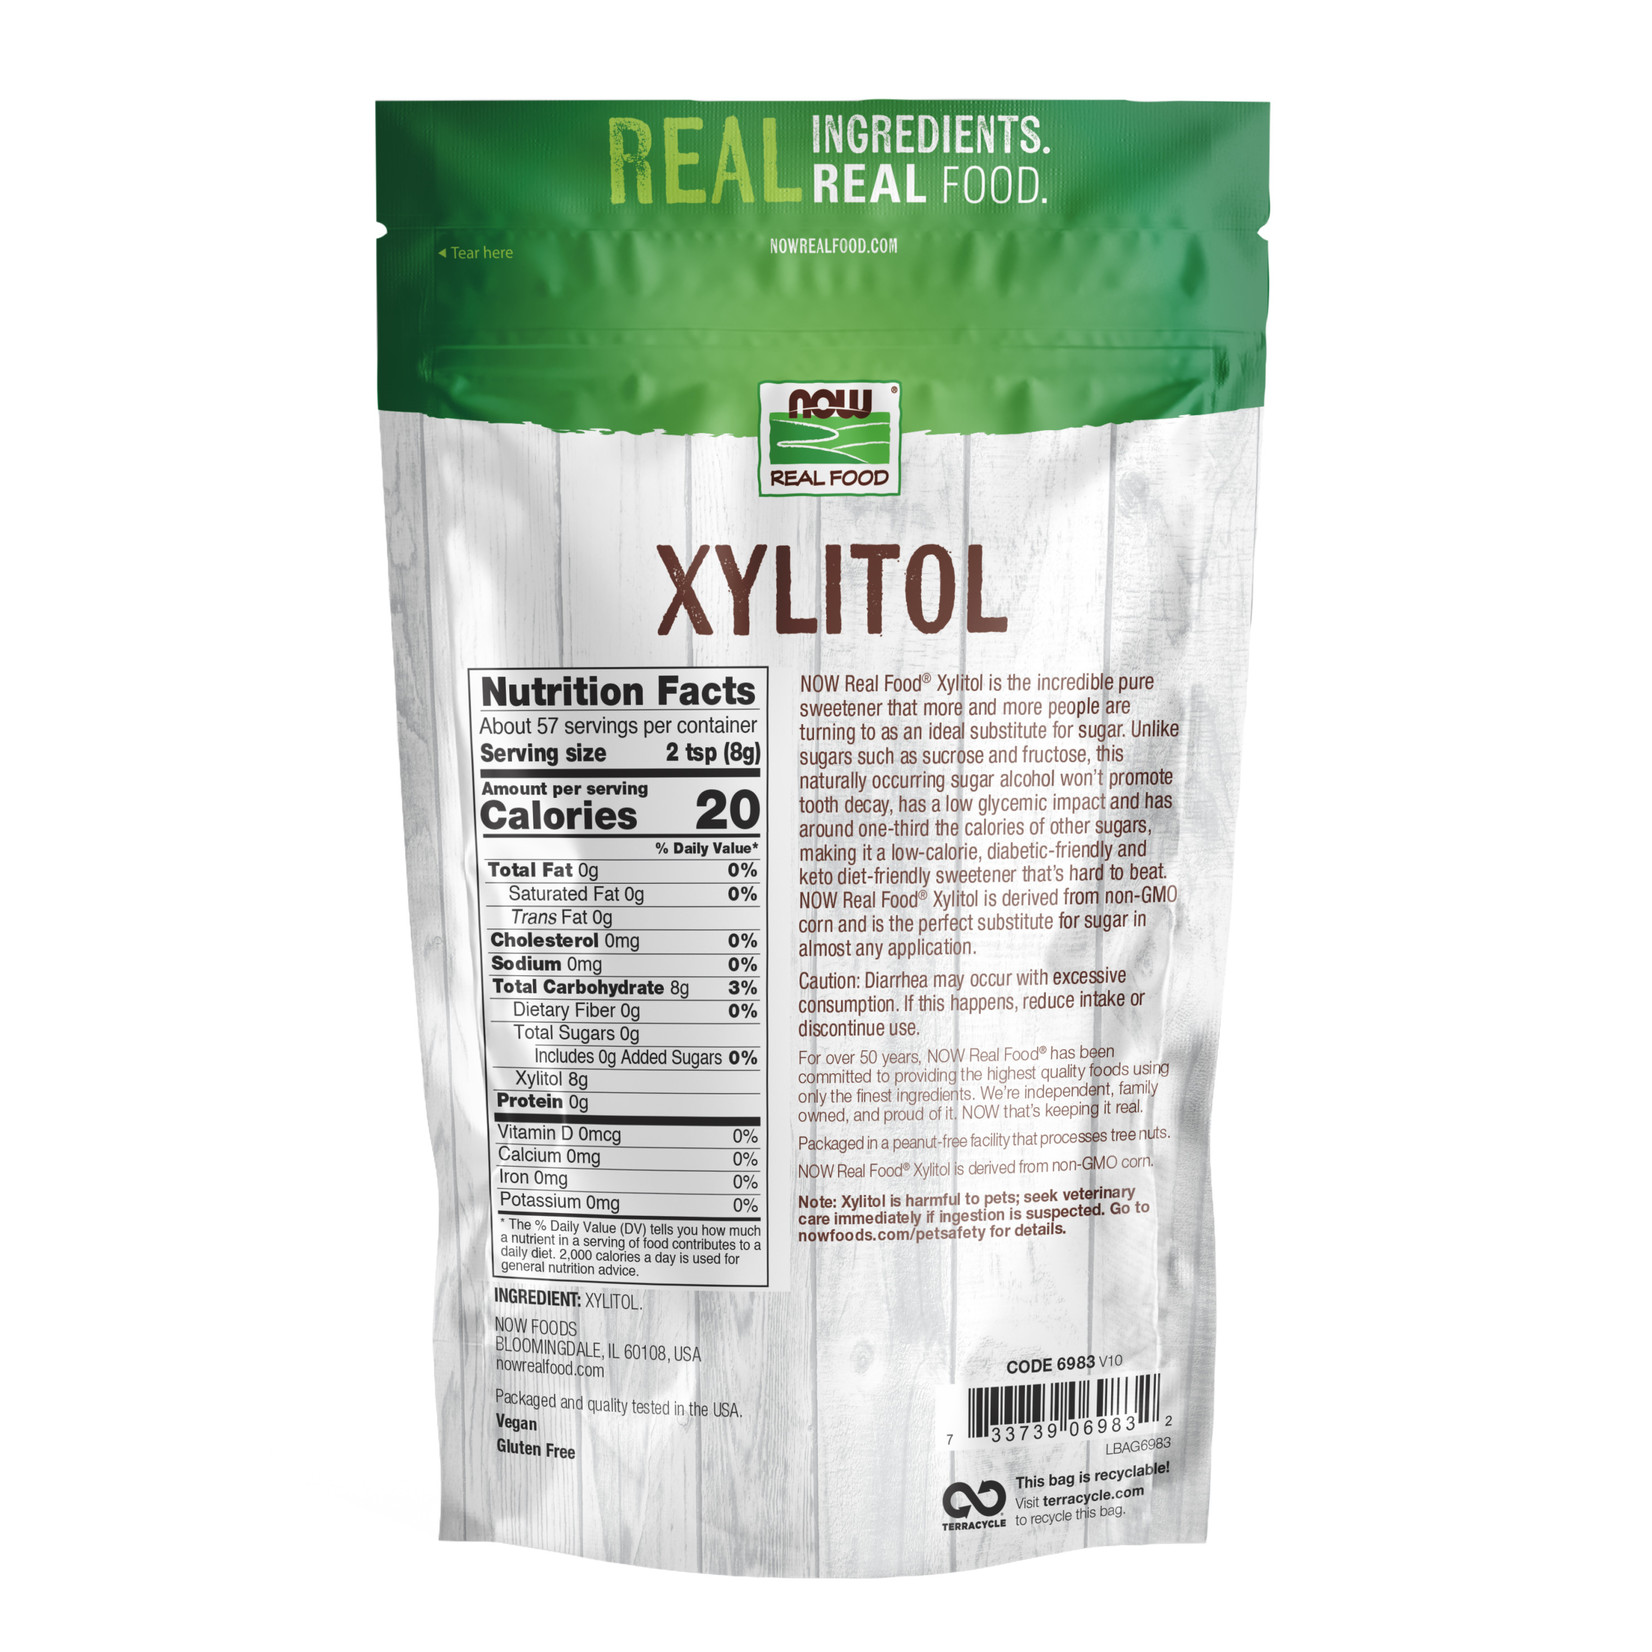 Now Now - Xylitol - 1 lb